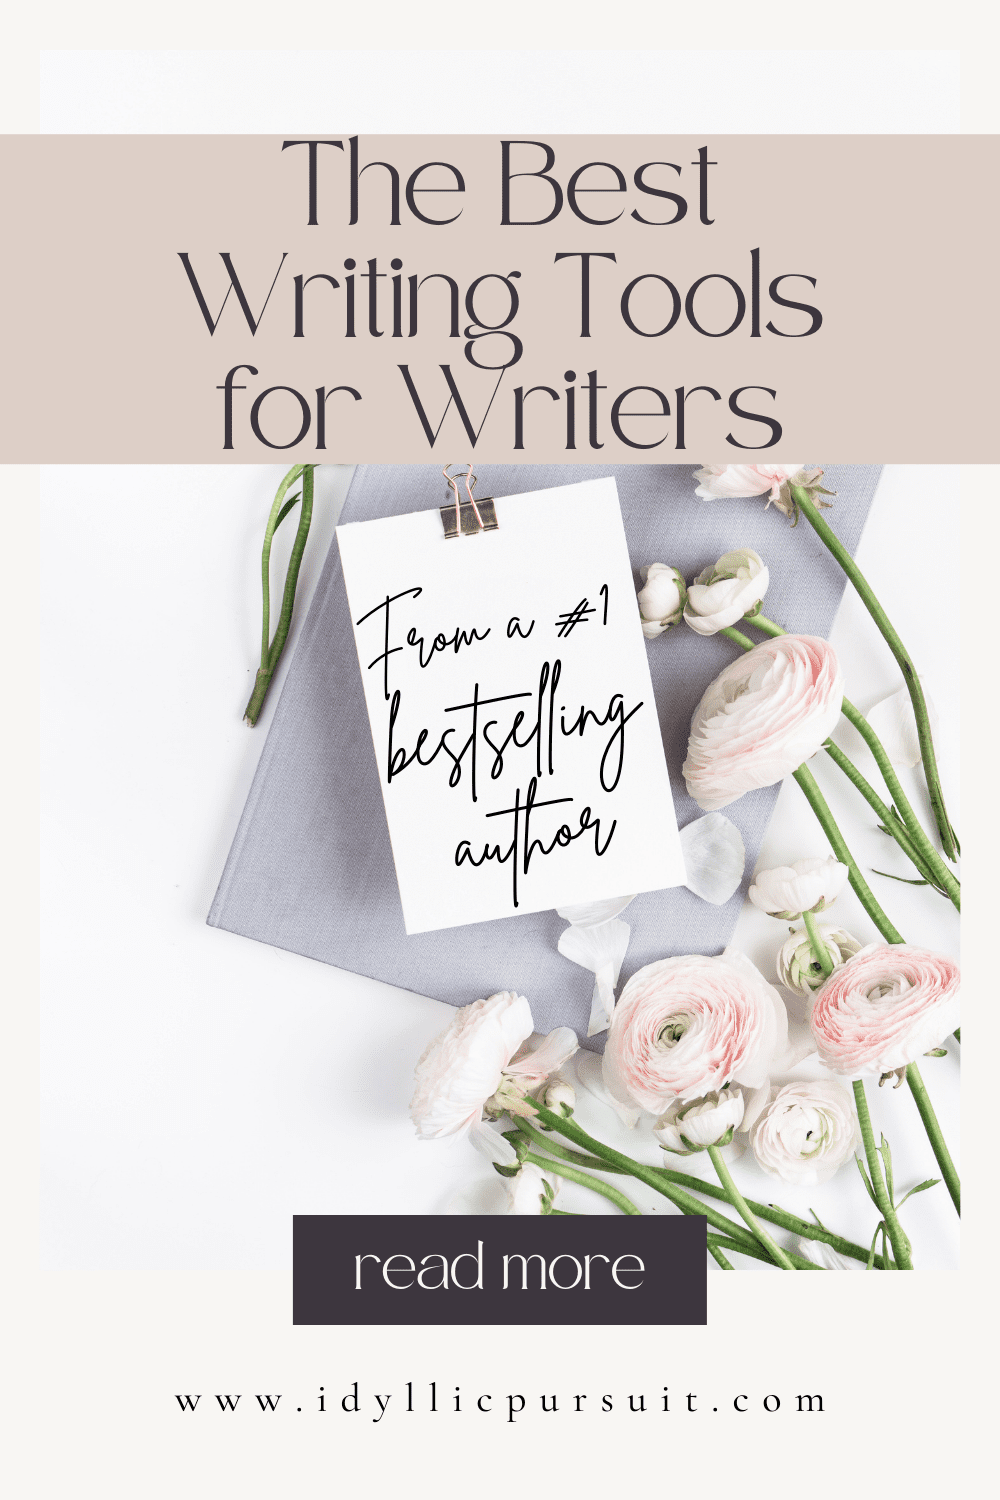 The Best Writing Tools for Writers